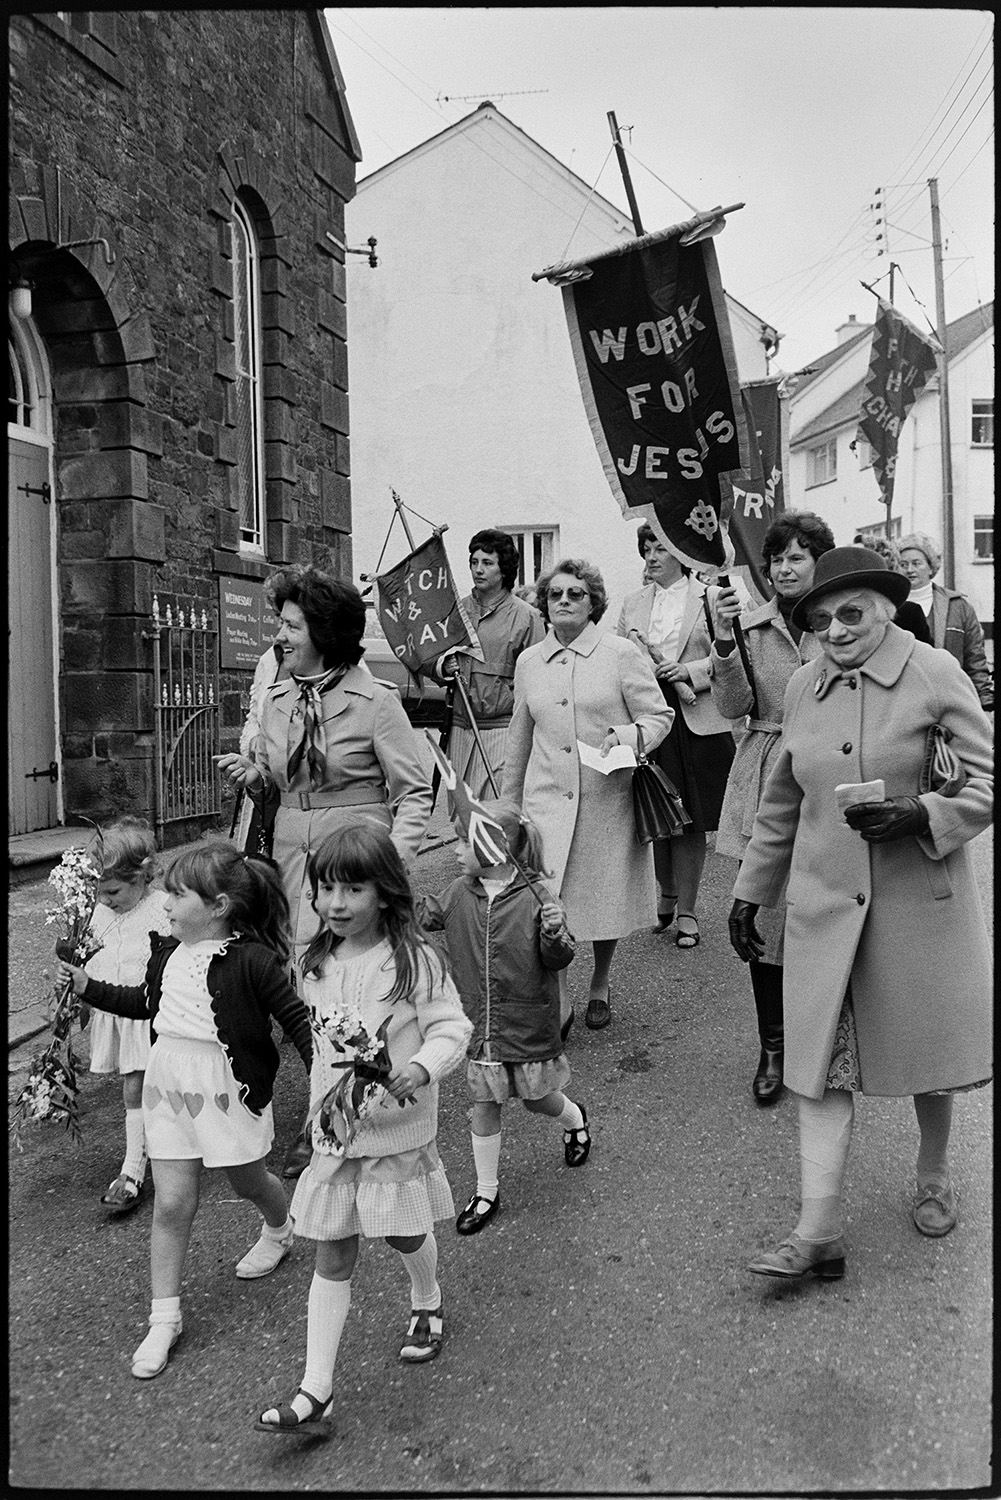 Church Sunday School Parade with banners and Silver Band marching behind garland.
[Women and children marching along a street in Hatherleigh in the Hatherleigh Church Sunday Schools Parade. The children are carrying bouquets of flowers and some of the women are carrying banners.]